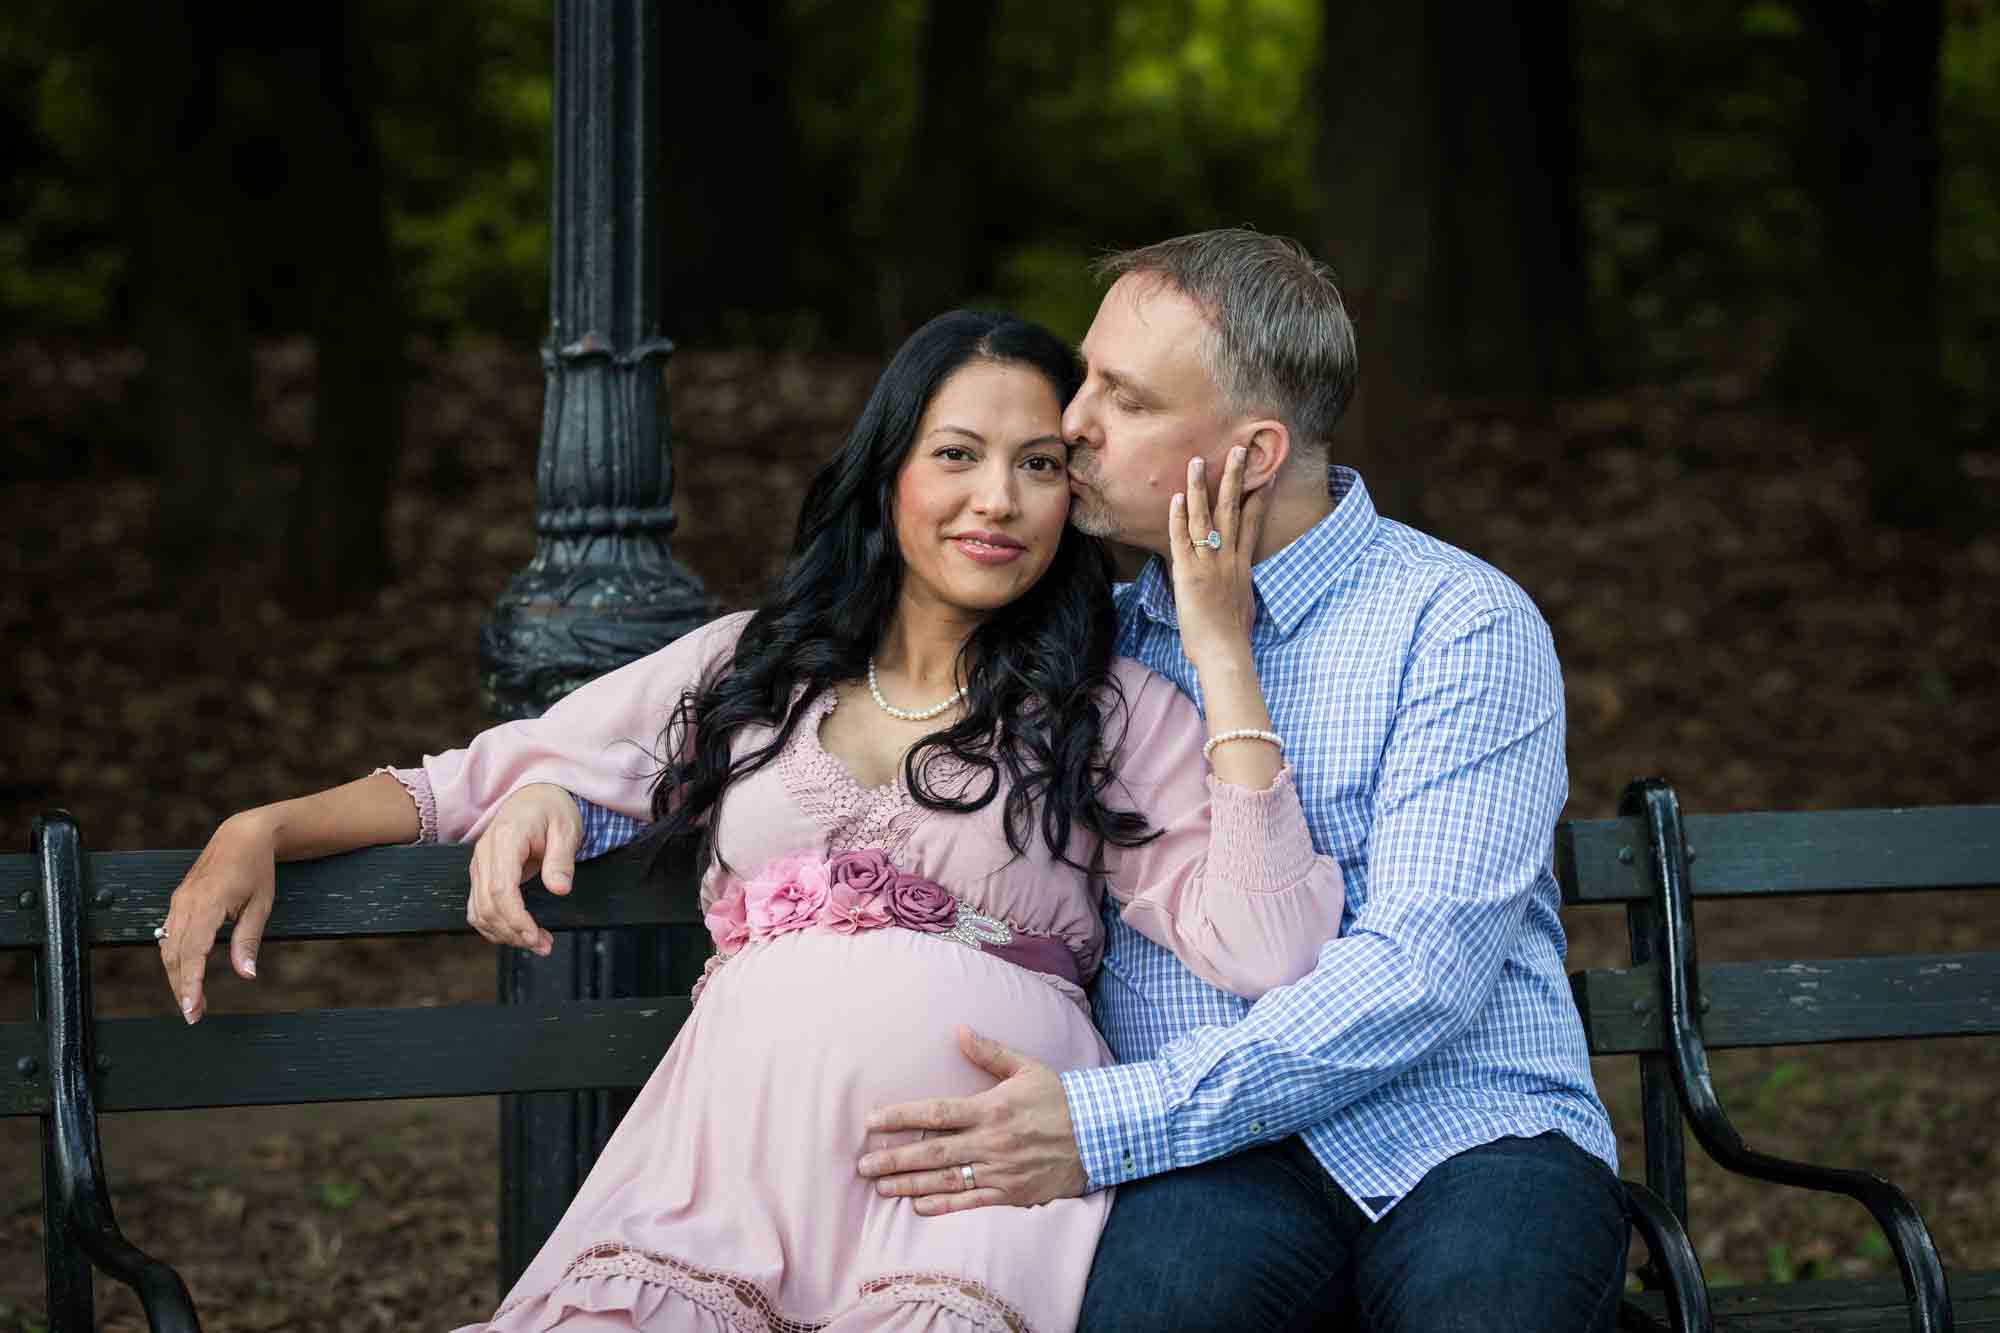 Forest Park maternity photos of couple kissing on a bench